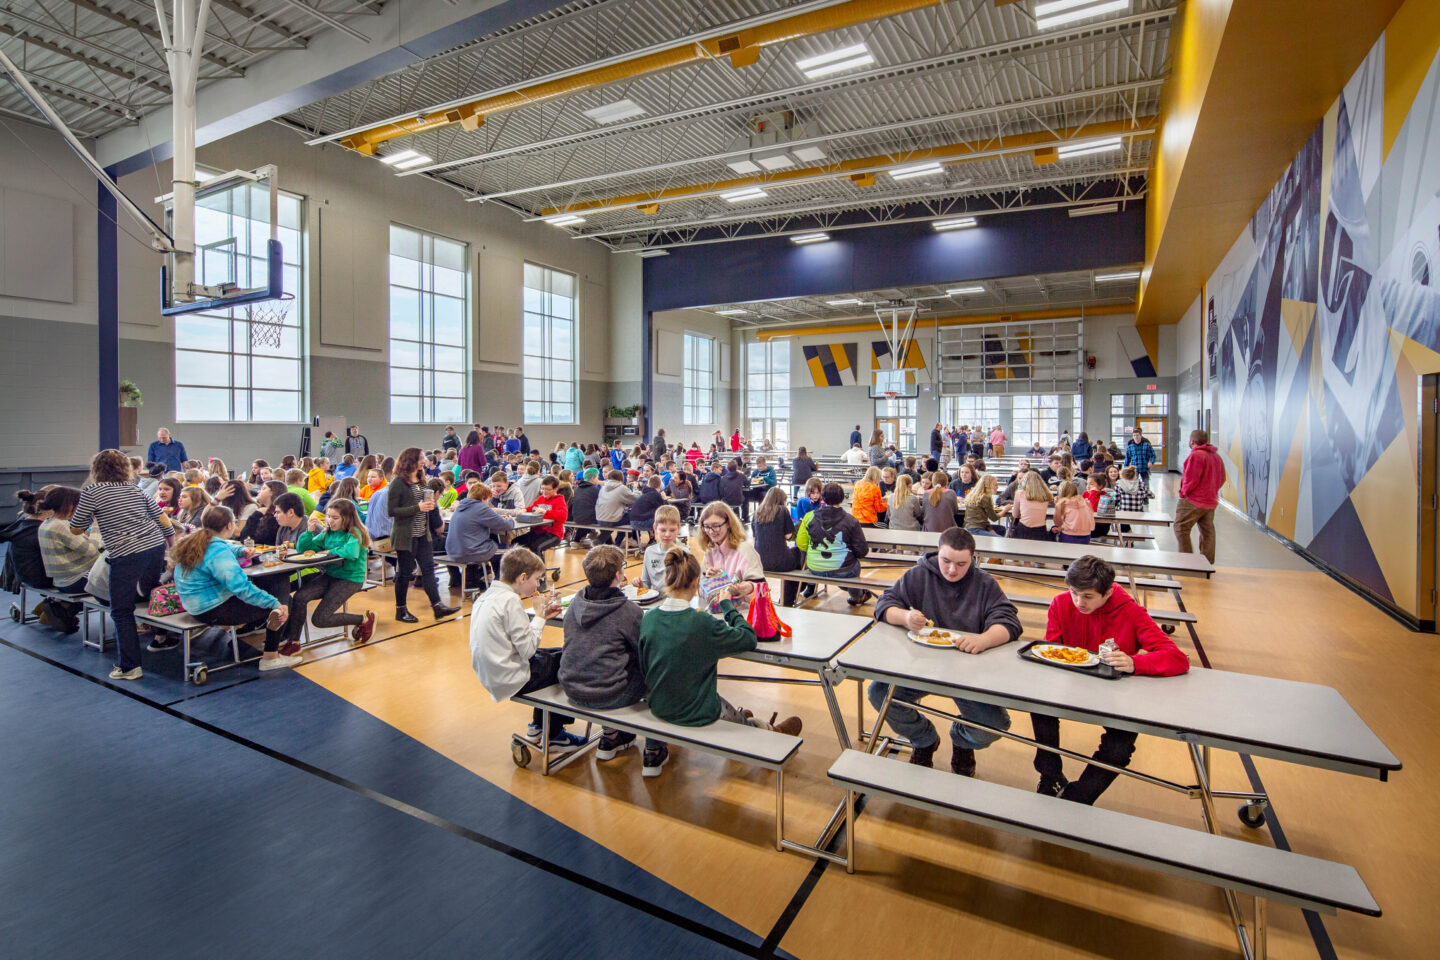 Basketball goals hover above filled tables in bright, multipurpose cafeteria at Northern Ozaukee School District